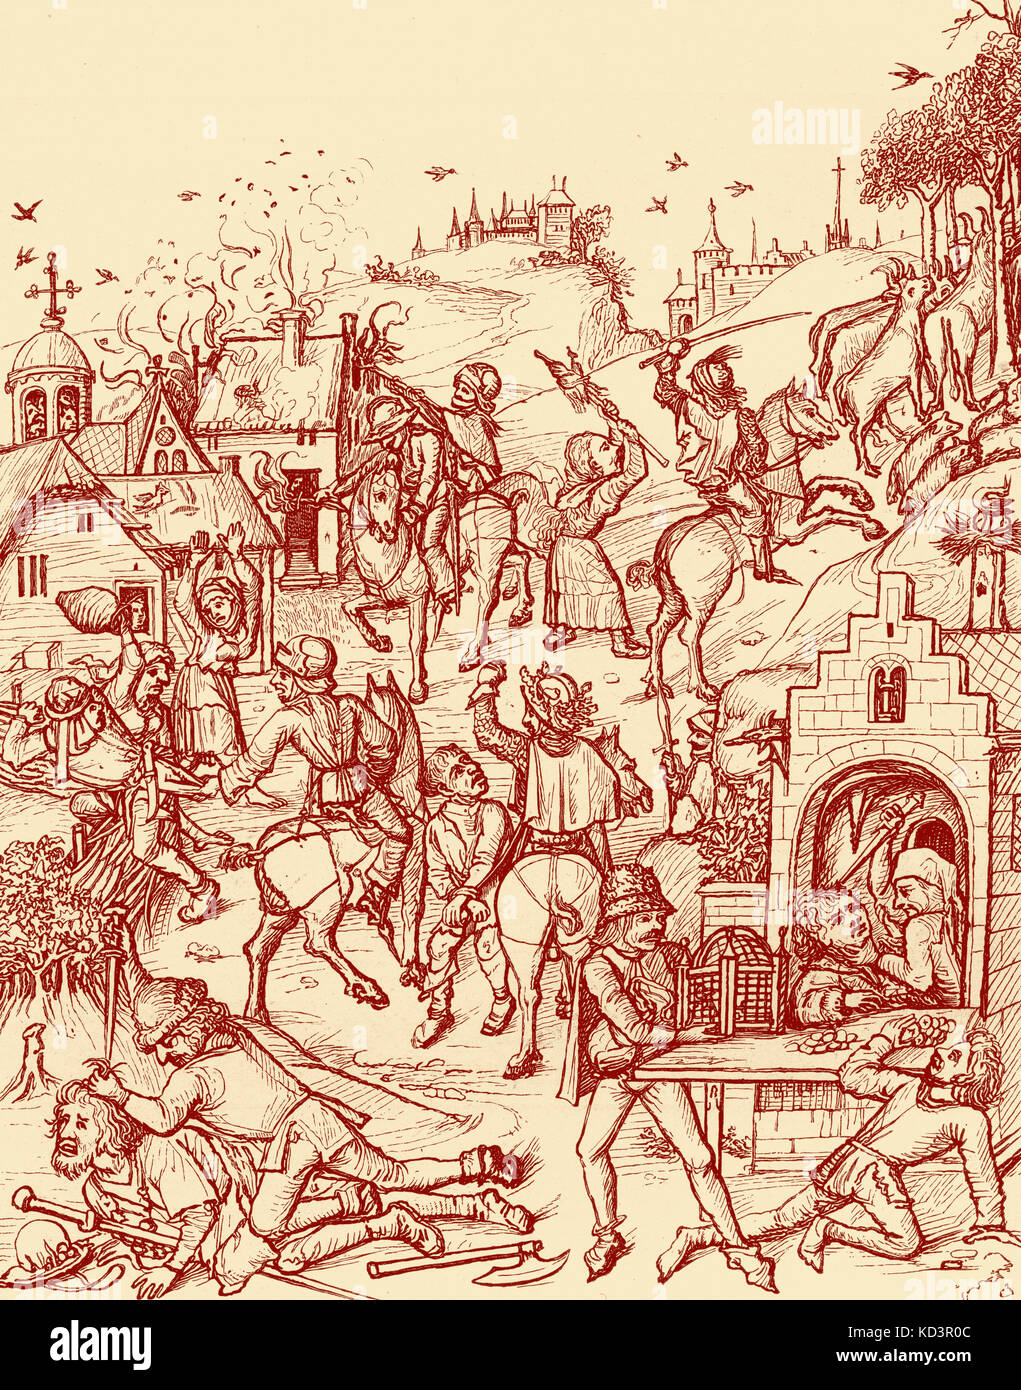 Pillaging of a Medieval German village by a robber baron - feudal landowner resorting to banditry, protected by his legal status, in order to alleviate financial difficulty, 15th century illustration Stock Photo